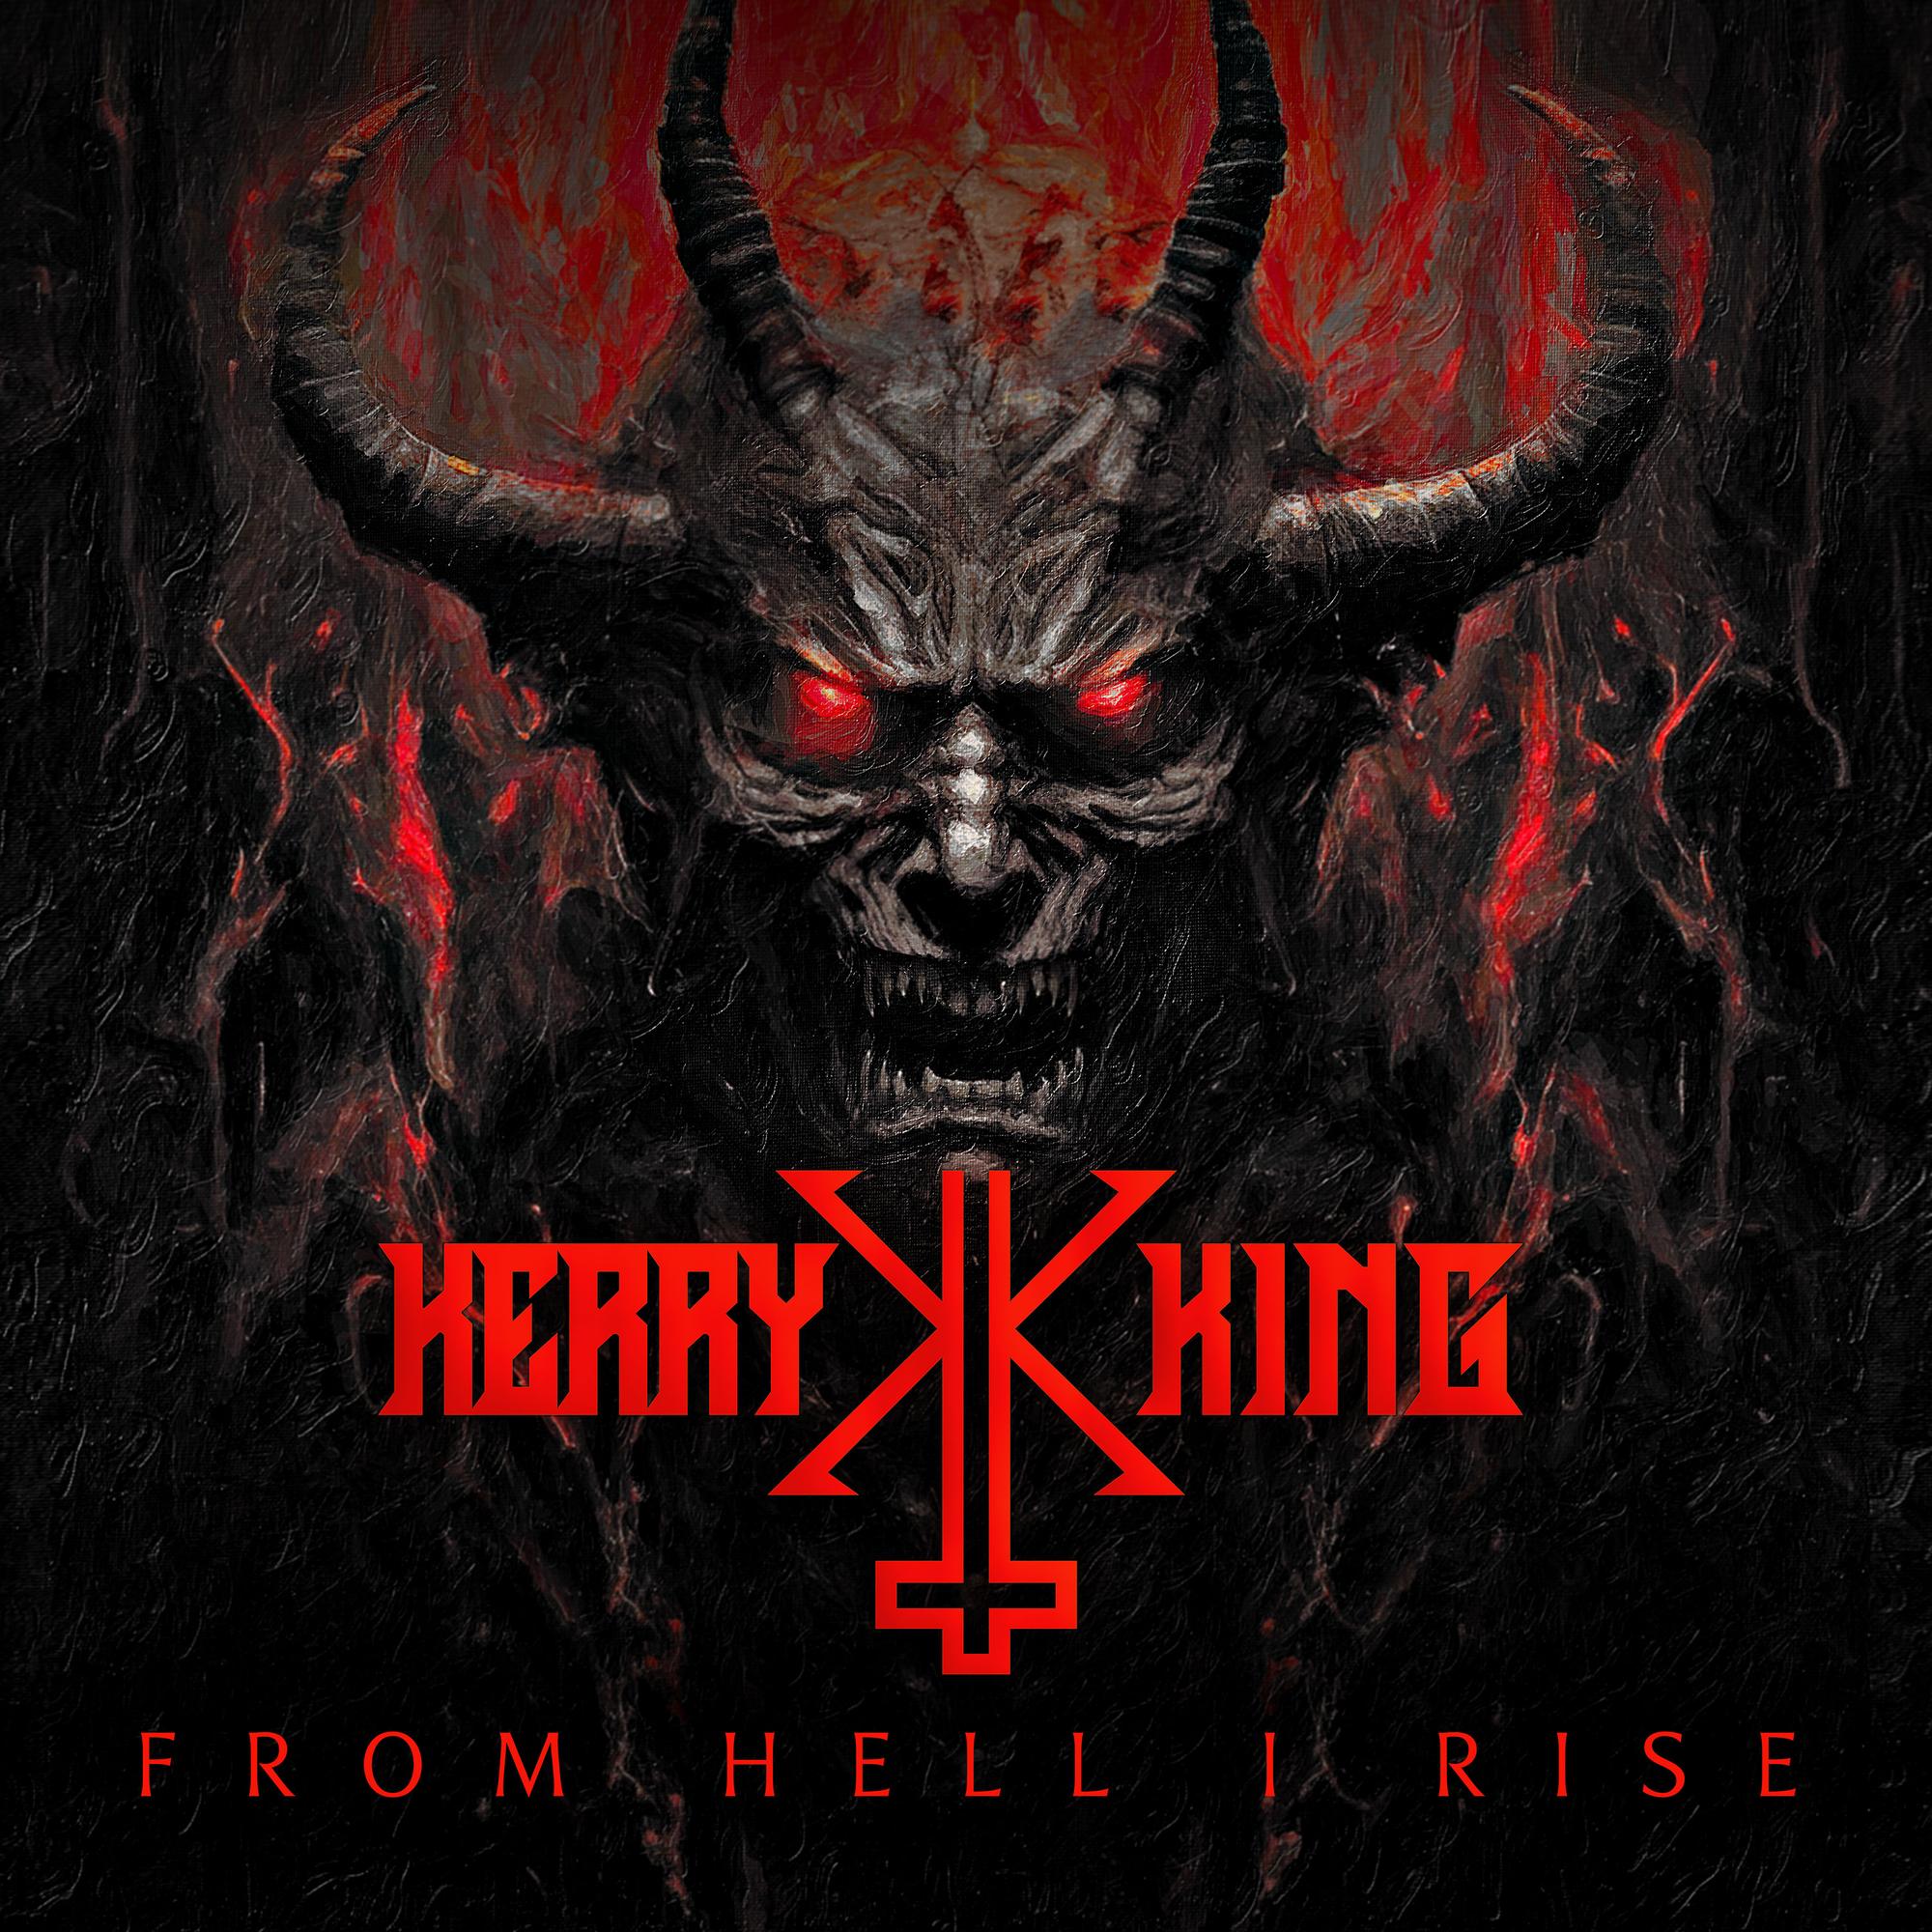 Kerry King "From Hell I Rise" CD - PRE-ORDER